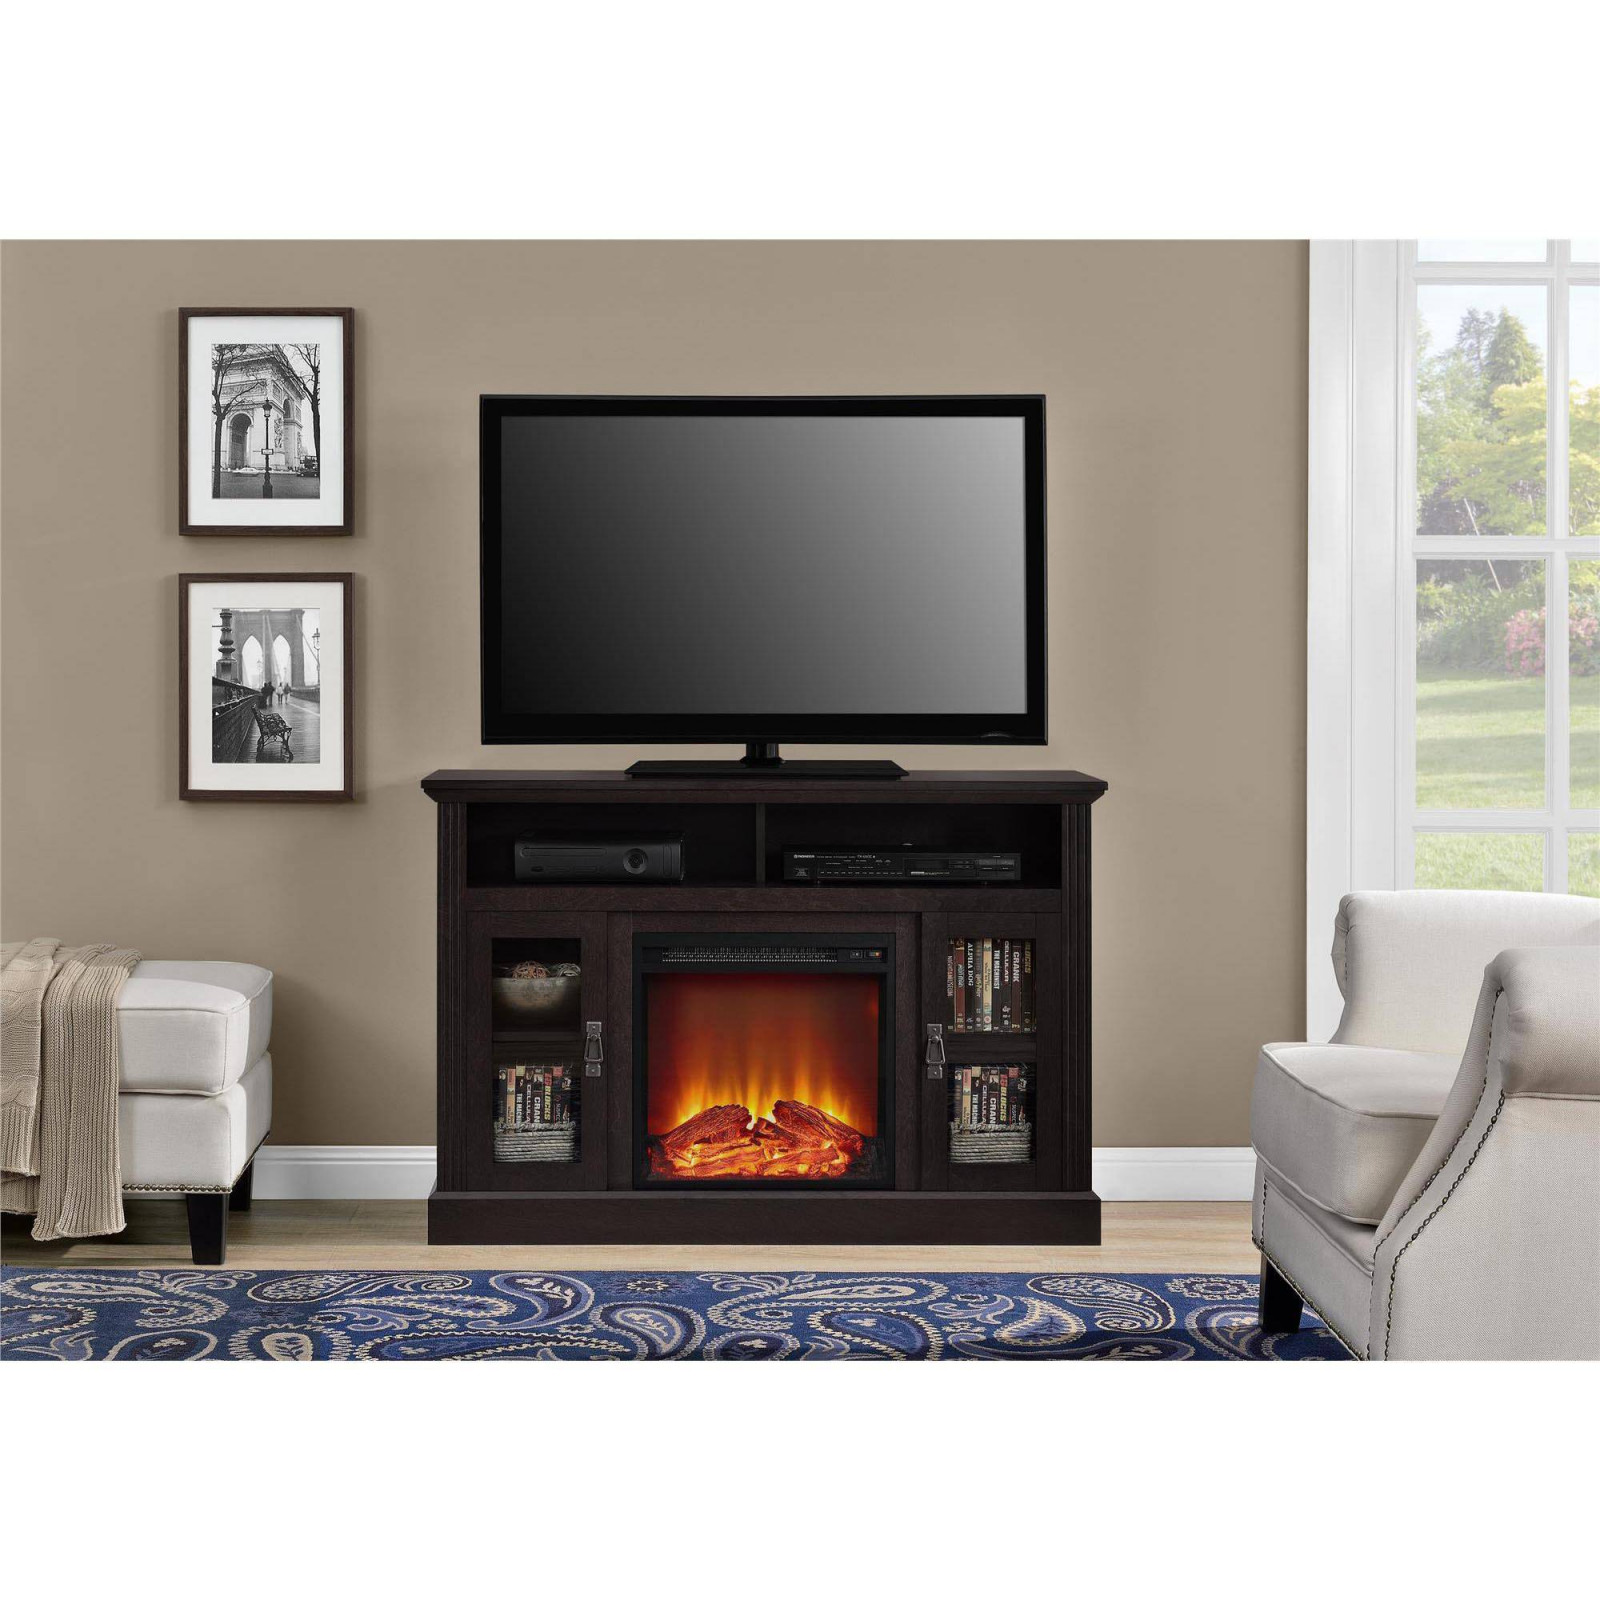 Center Room Fireplace Best Of 35 Minimaliste Electric Fireplace Tv Stand